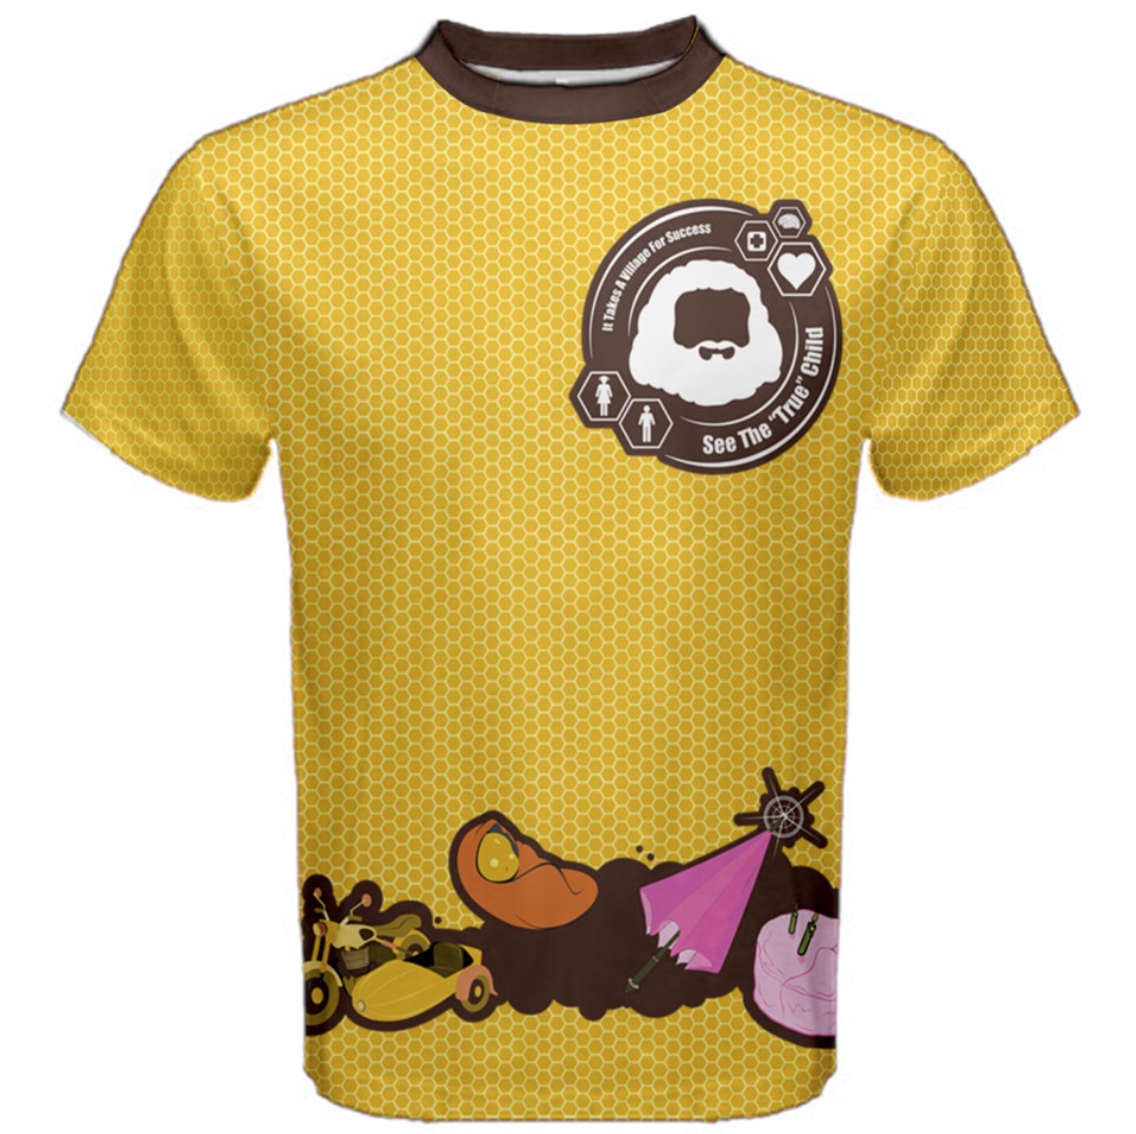 See The "TRUE" Child (Yellow Patterned) Cotton Tee - Inspired by Literary Character, Hagrid